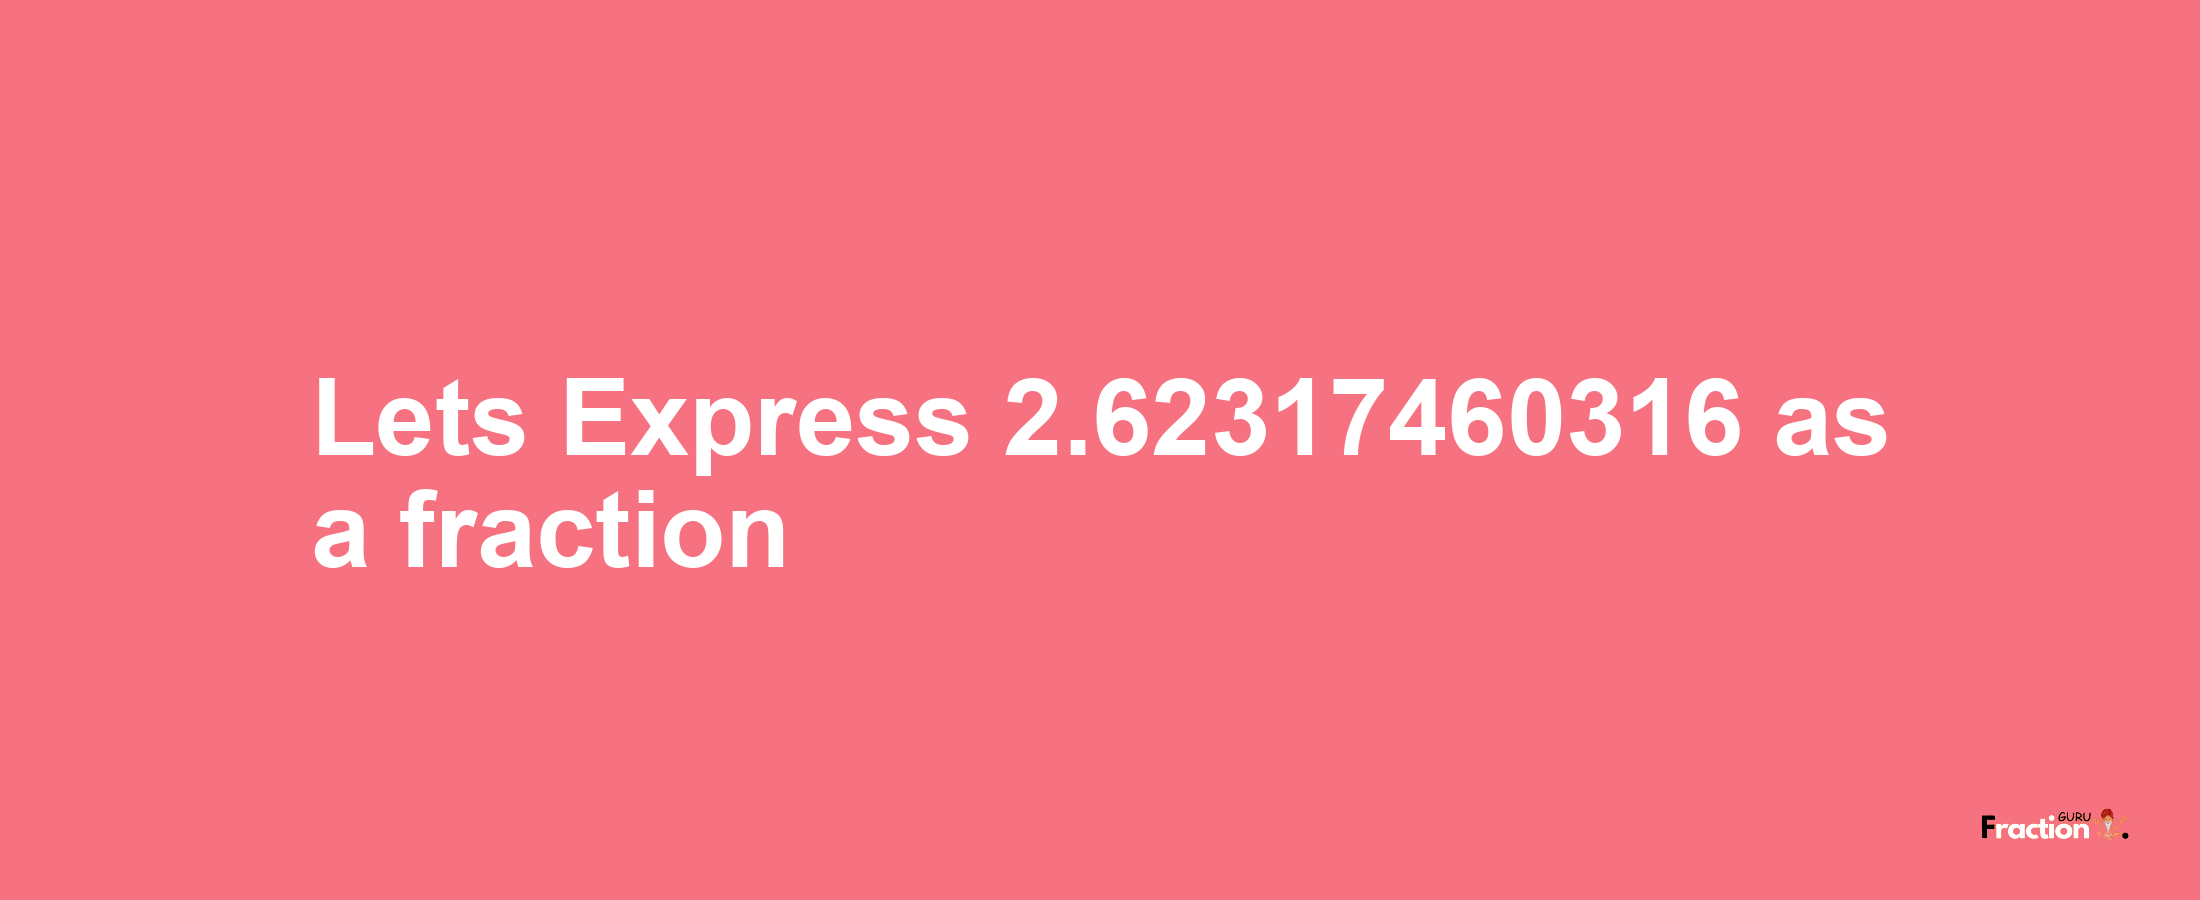 Lets Express 2.62317460316 as afraction